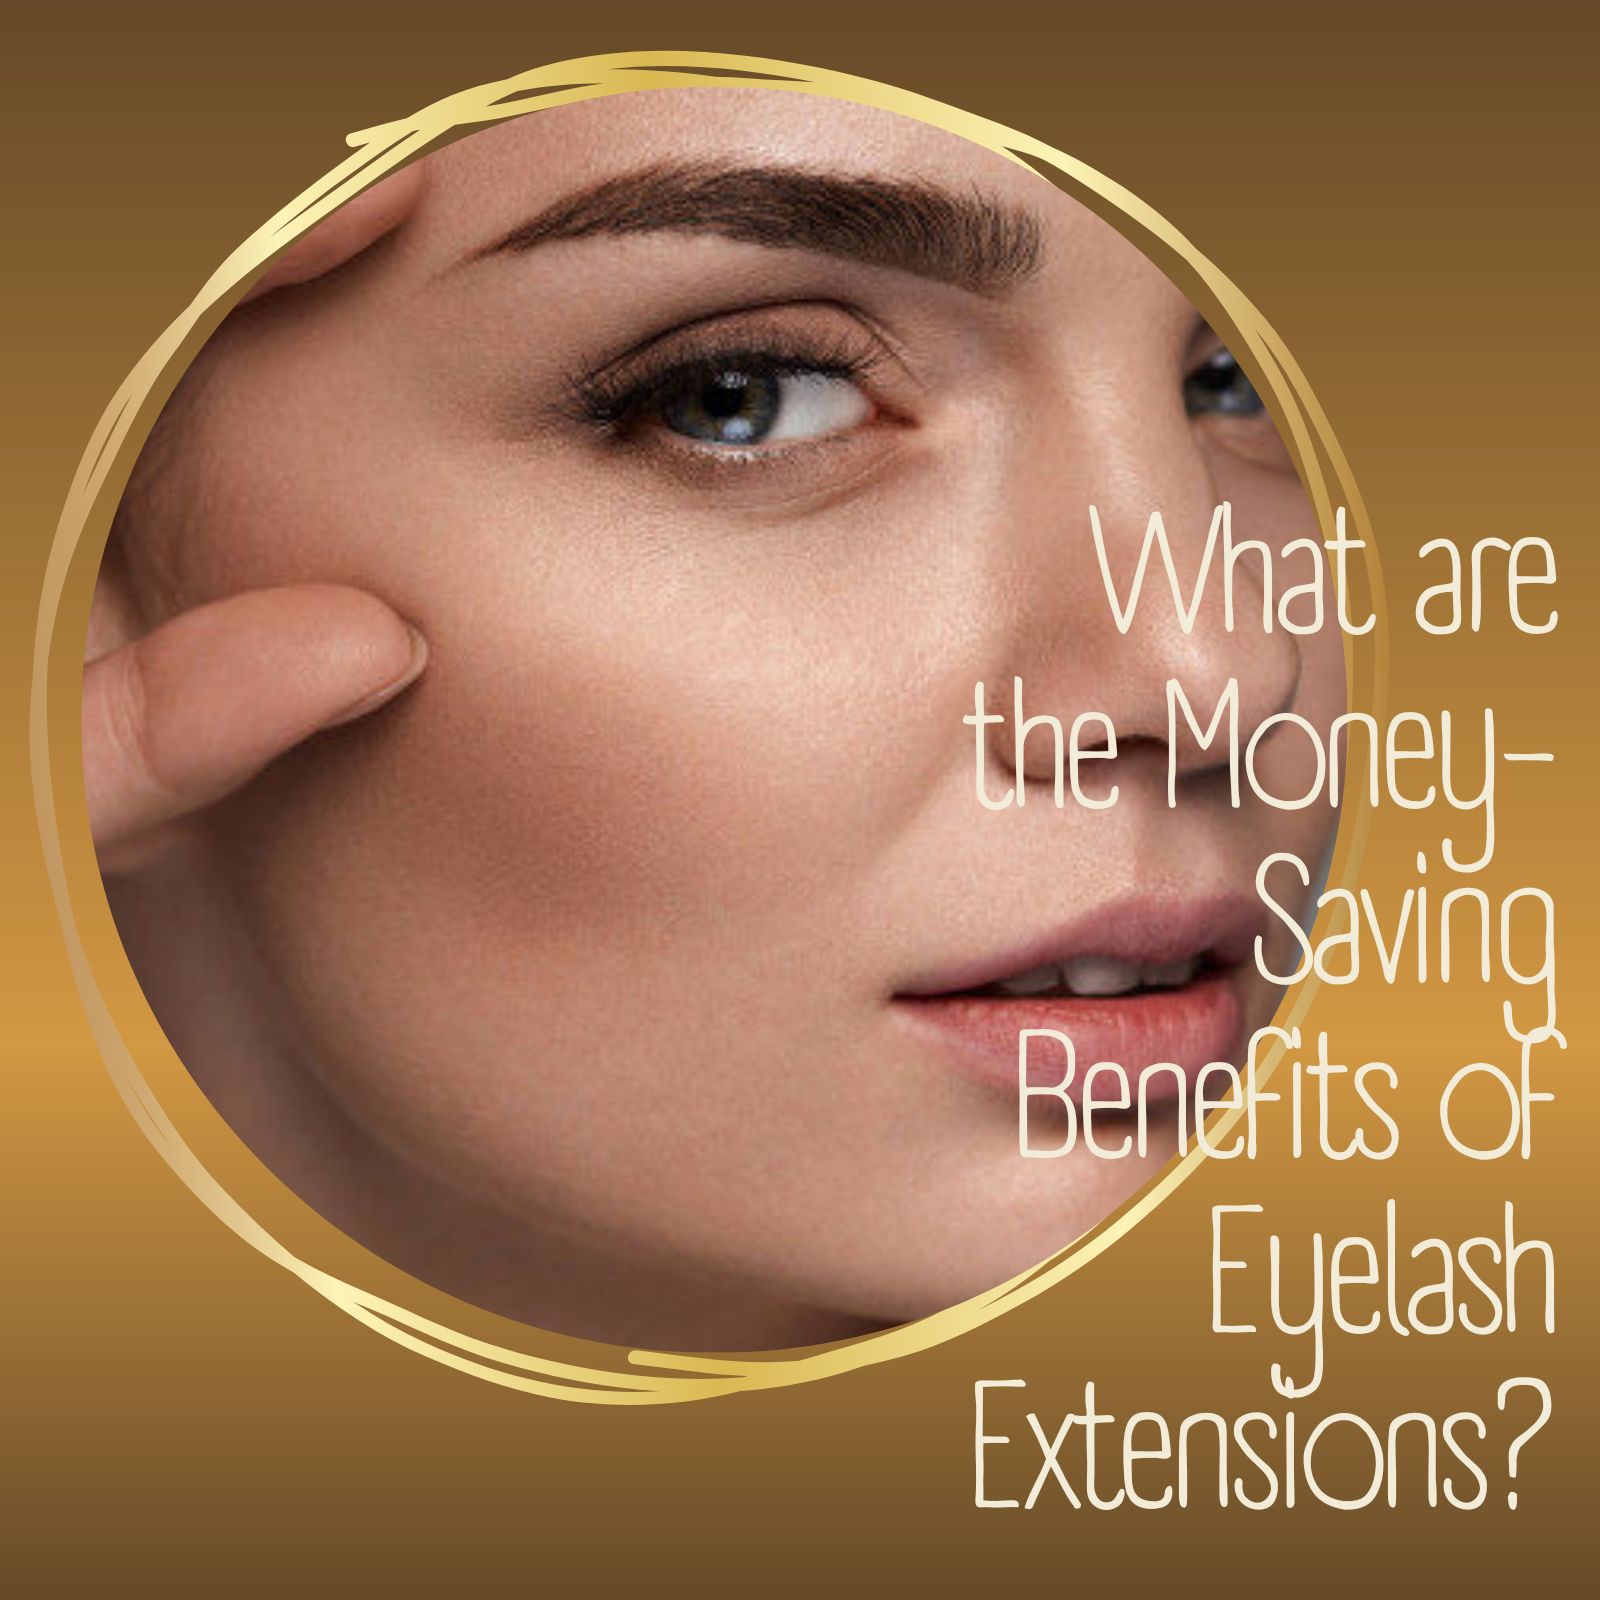 What are the Money-Saving Benefits of Eyelash Extensions?